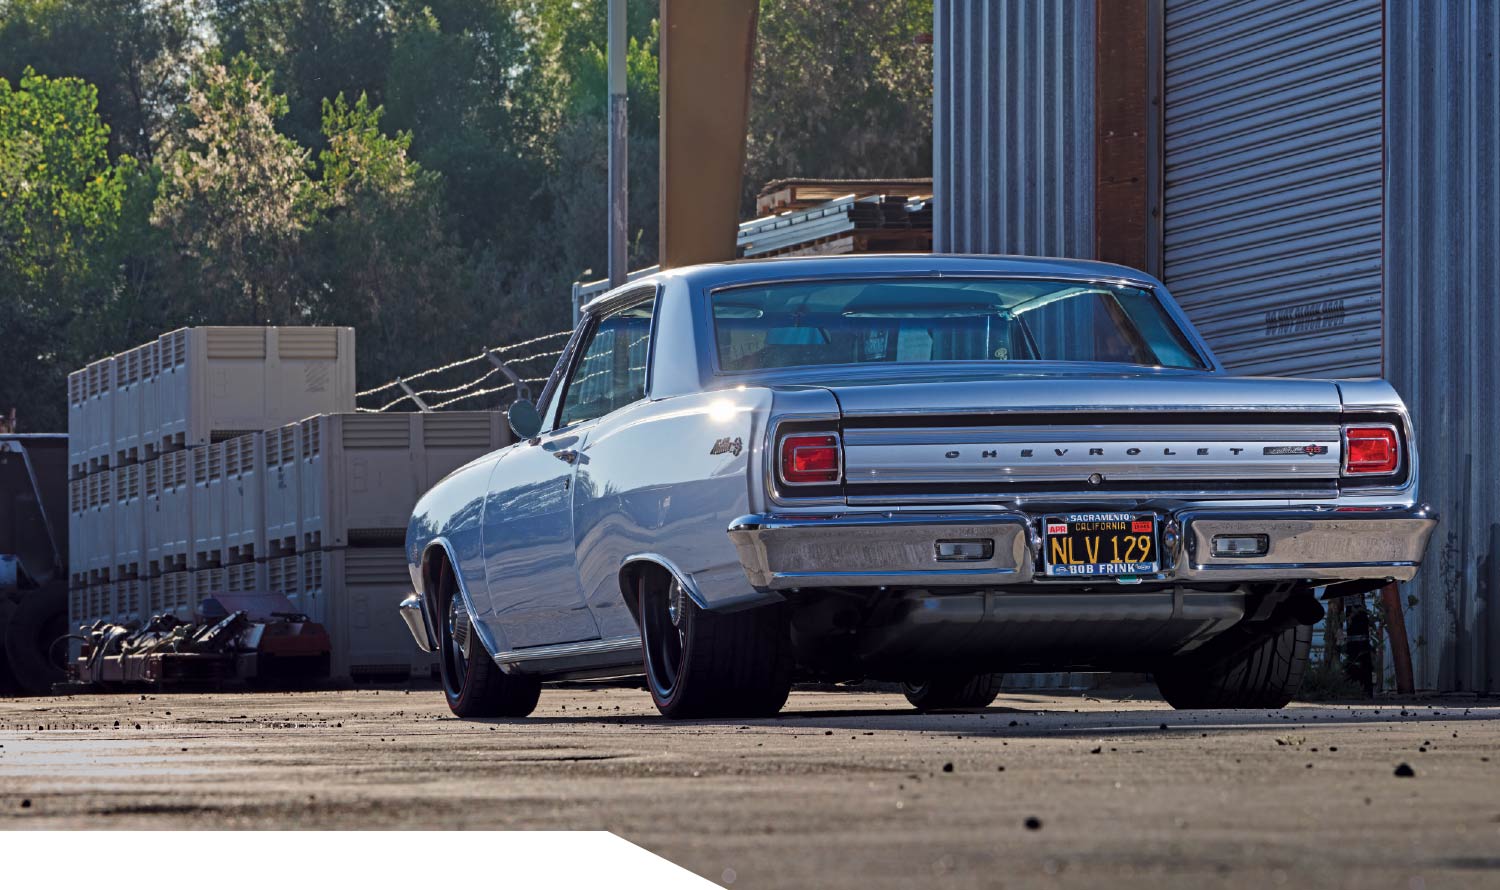 Rear view of the ’65 Chevelle SS